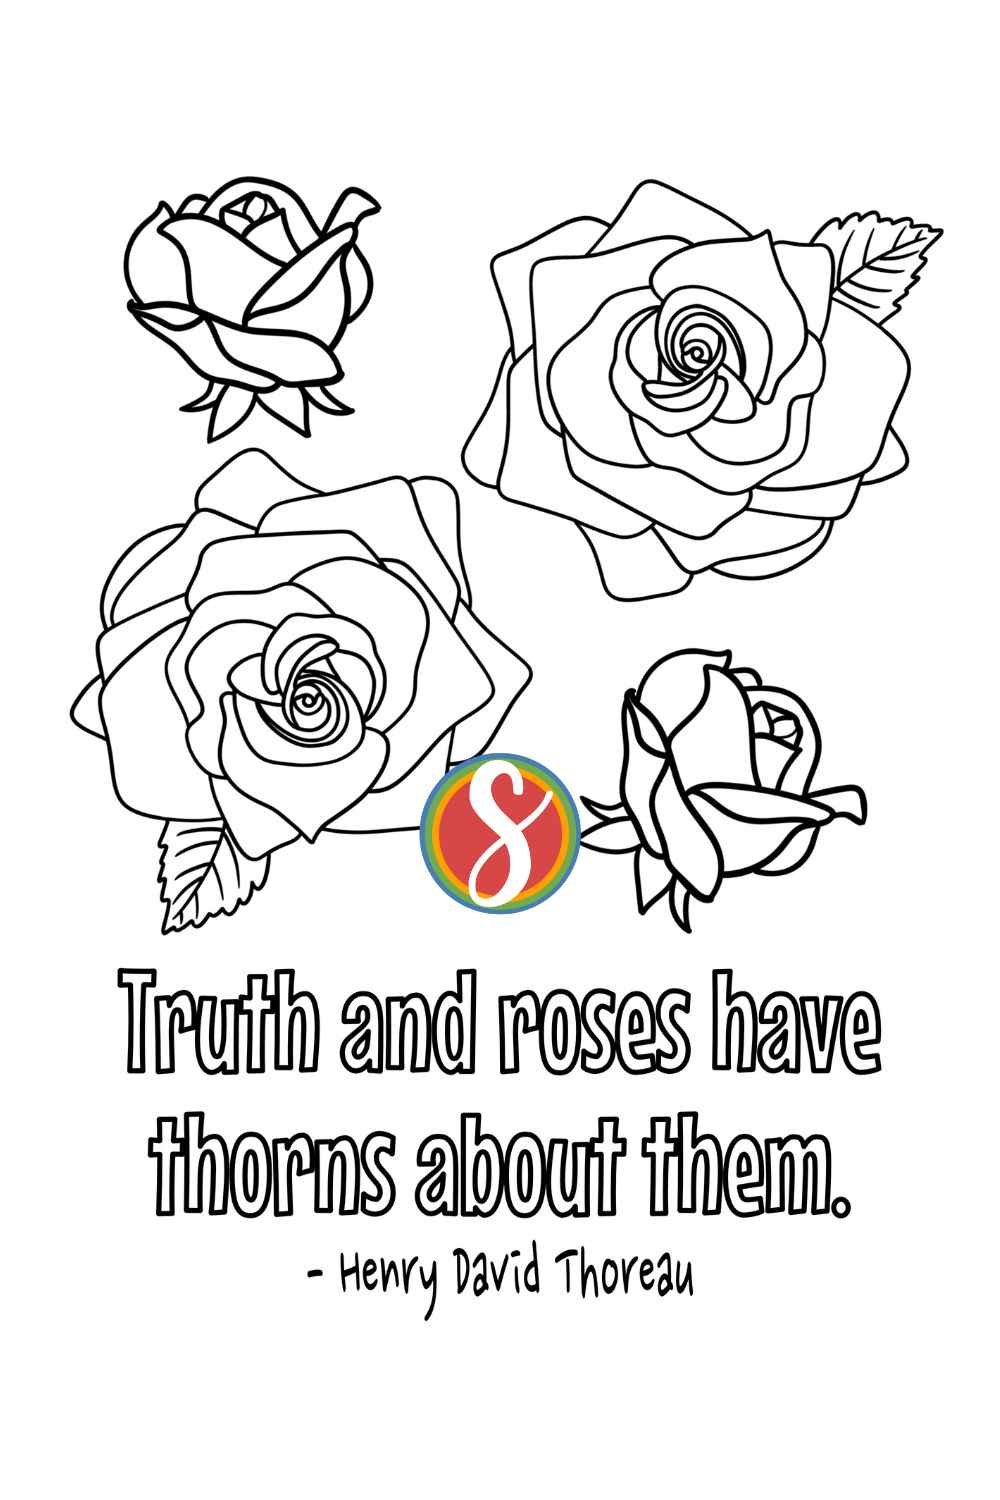 2 large roses and 2 smaller ones to color, colorable text "truth and roses have thorns about them"